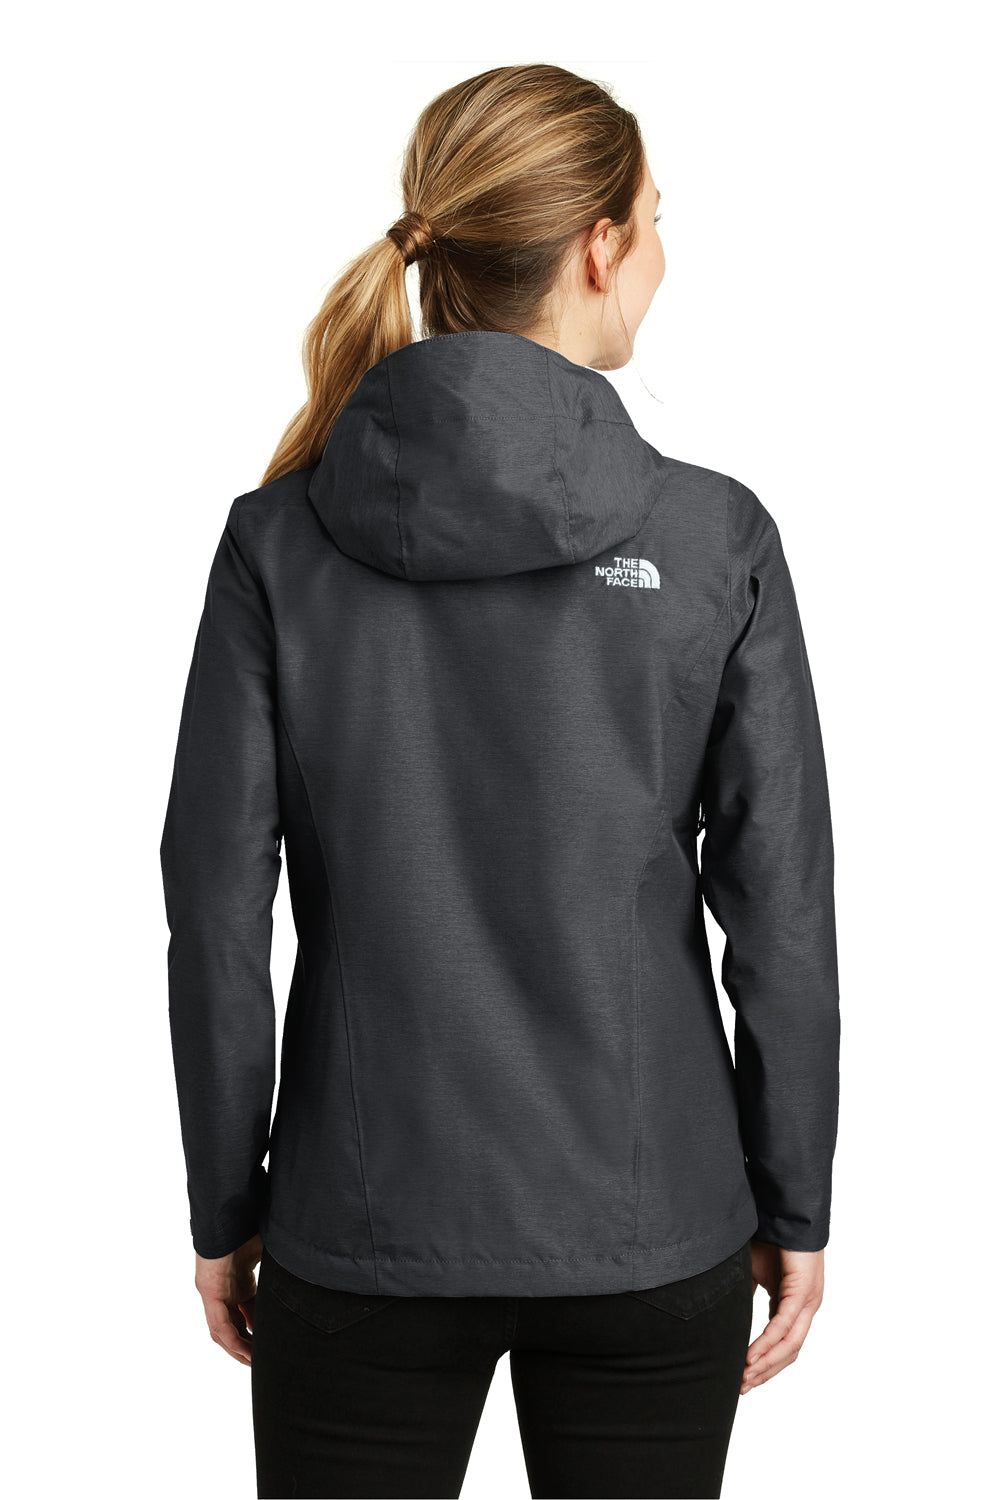 The North Face NF0A3LH5 Womens DryVent Waterproof Full Zip Hooded Jacket Heather Dark Grey Back